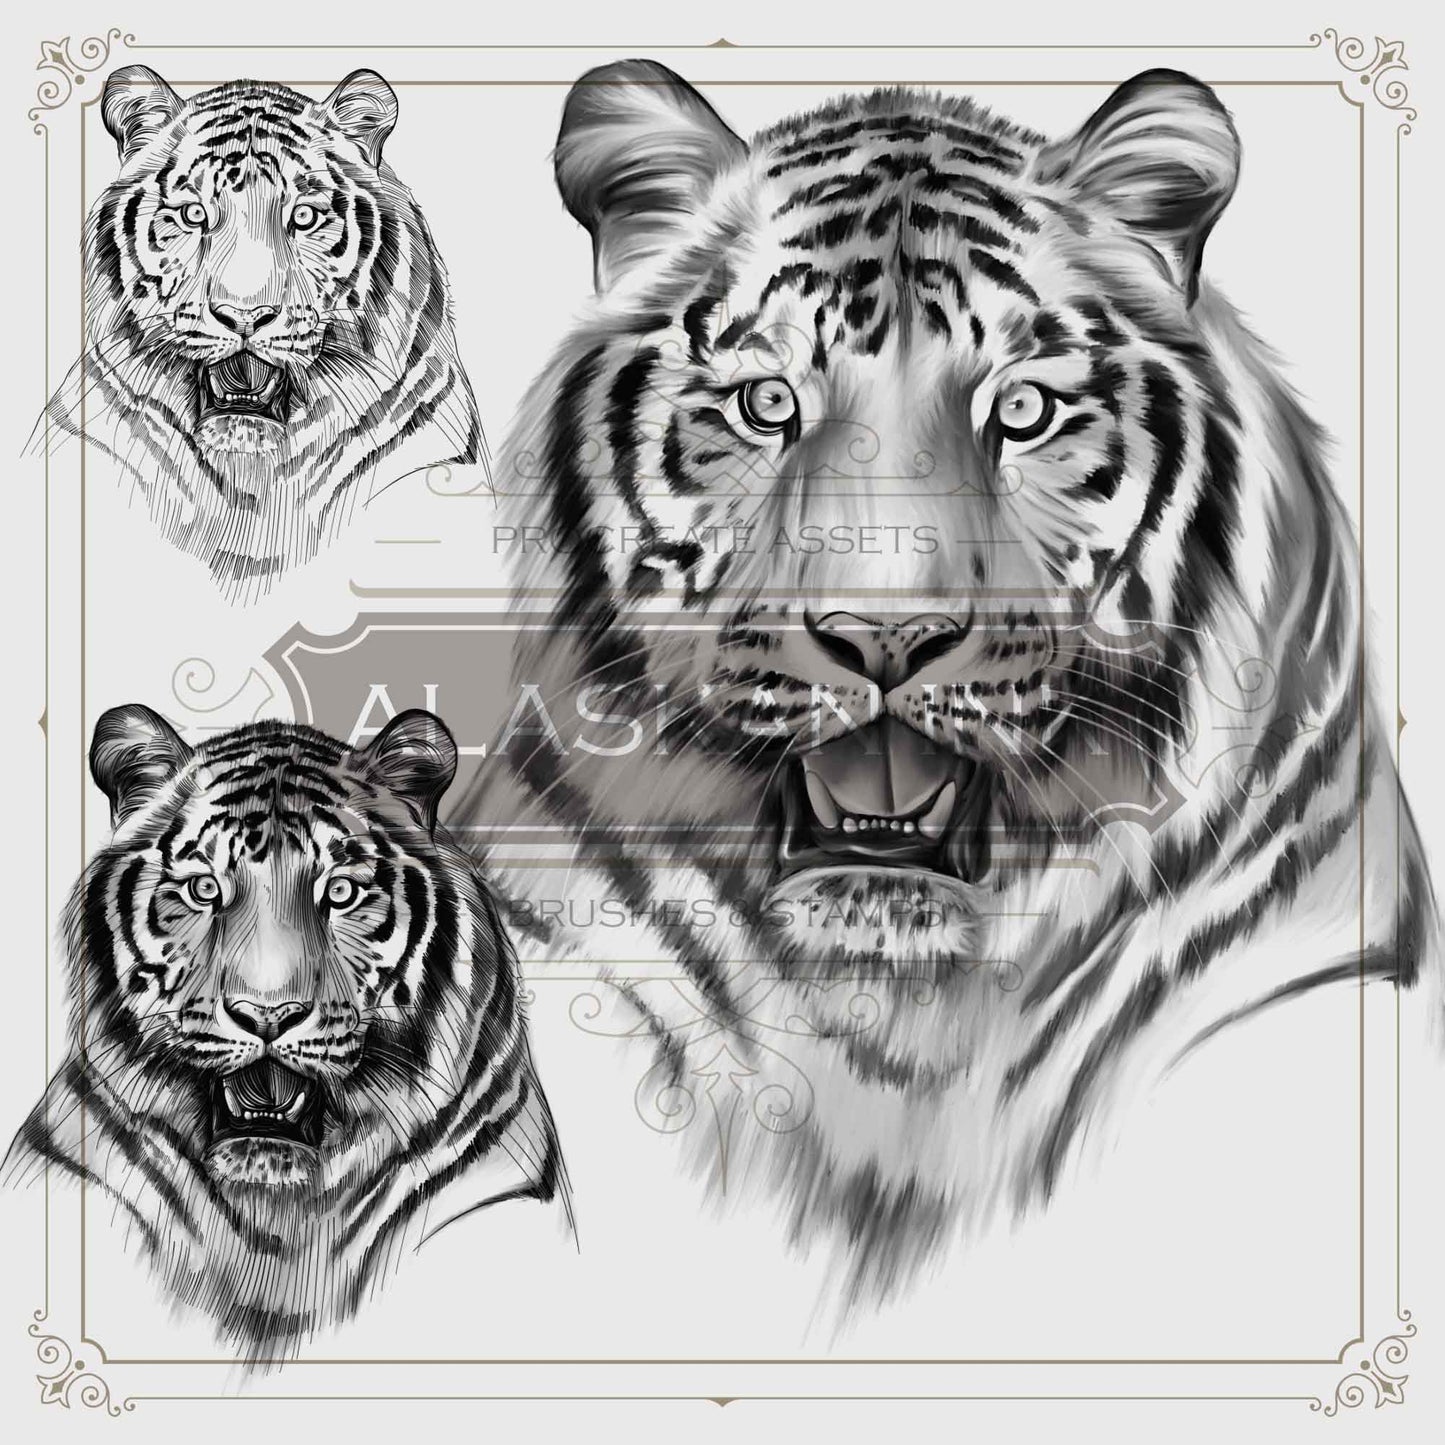 20 Realistic Tigers Tattoo brushes and stamps for Procreate app